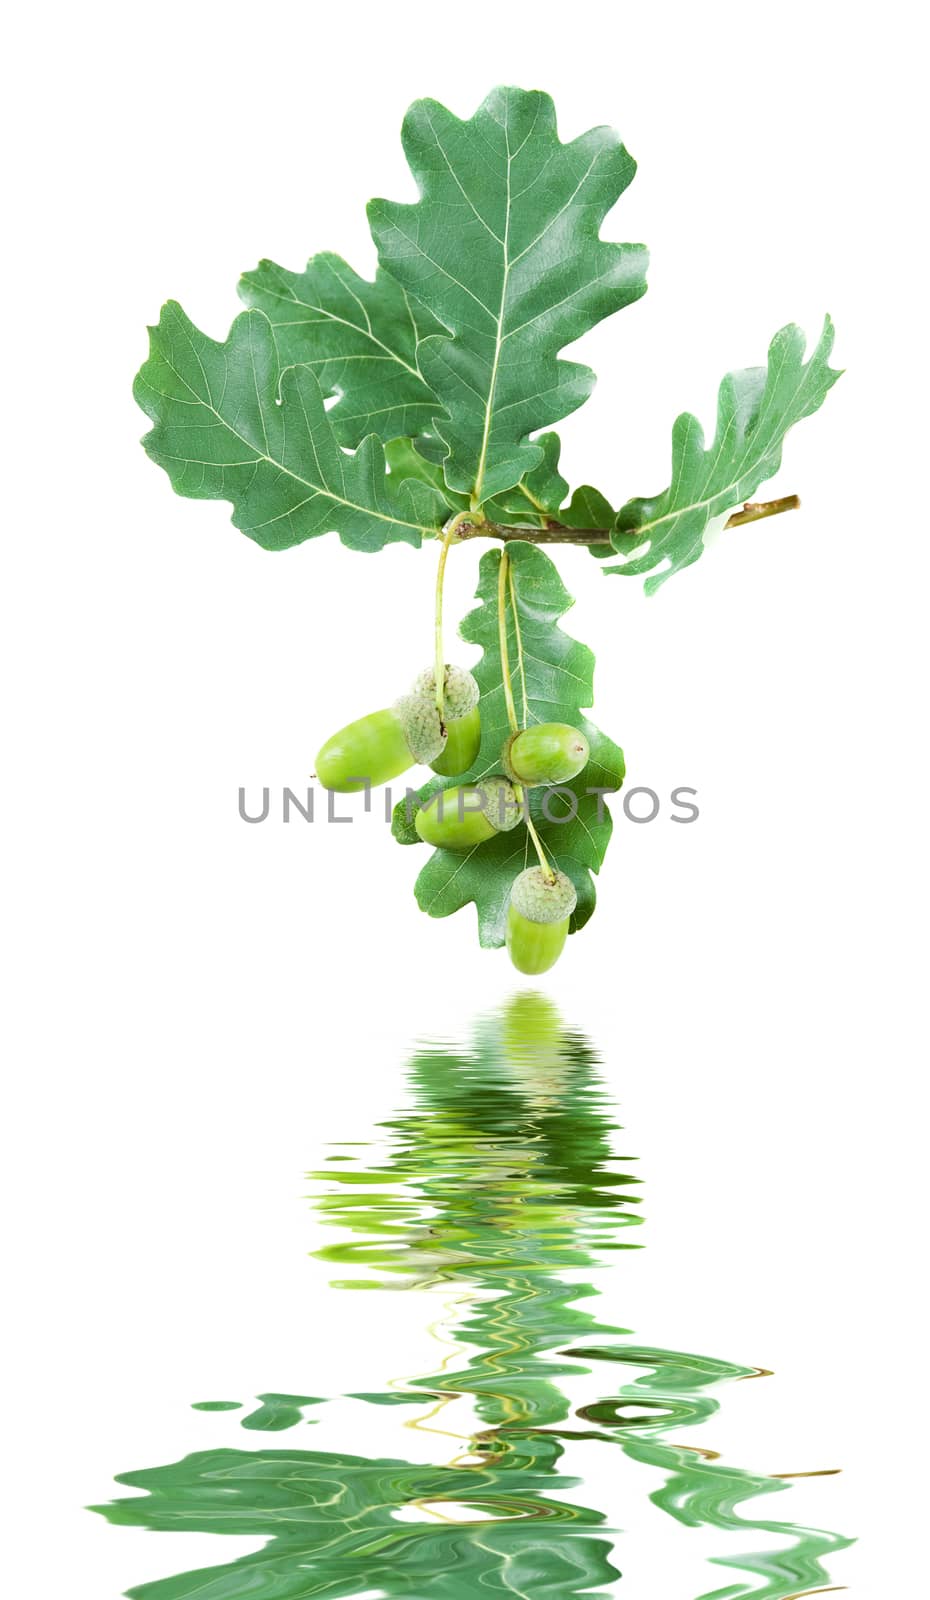 Oak branch with green leaves and acorns isolated on a white background reflected in the water surface with small waves